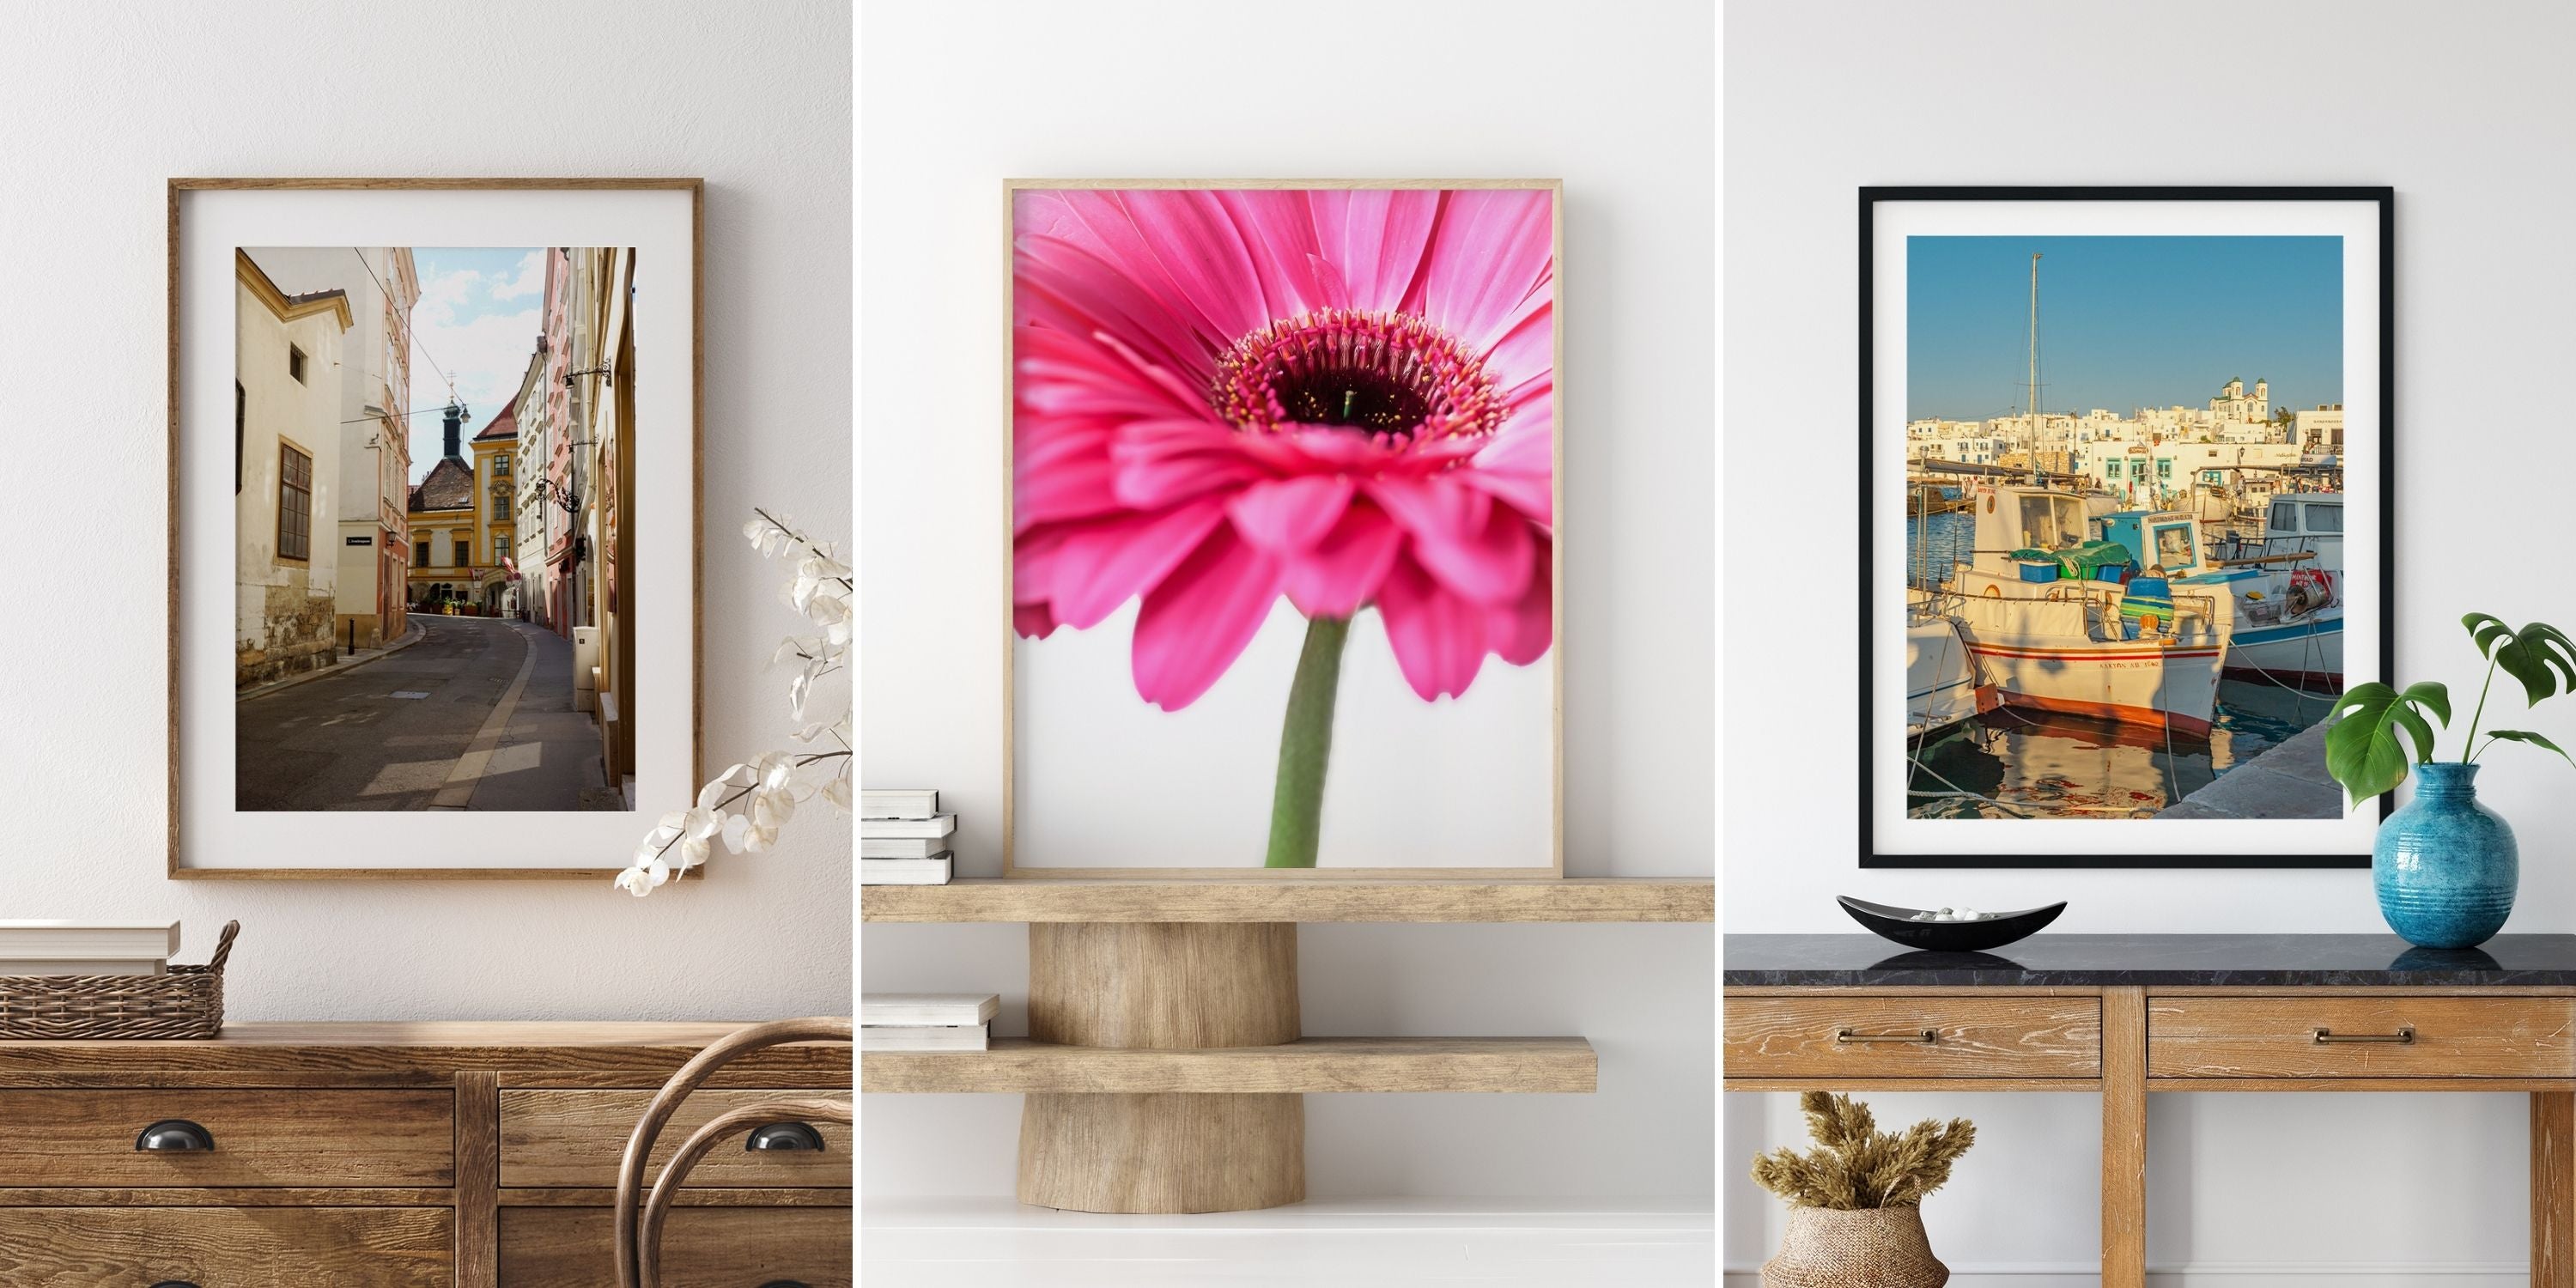 Poster Prints Vs. Photo Prints Vs. Fine Art Photography Prints - What's the Difference?